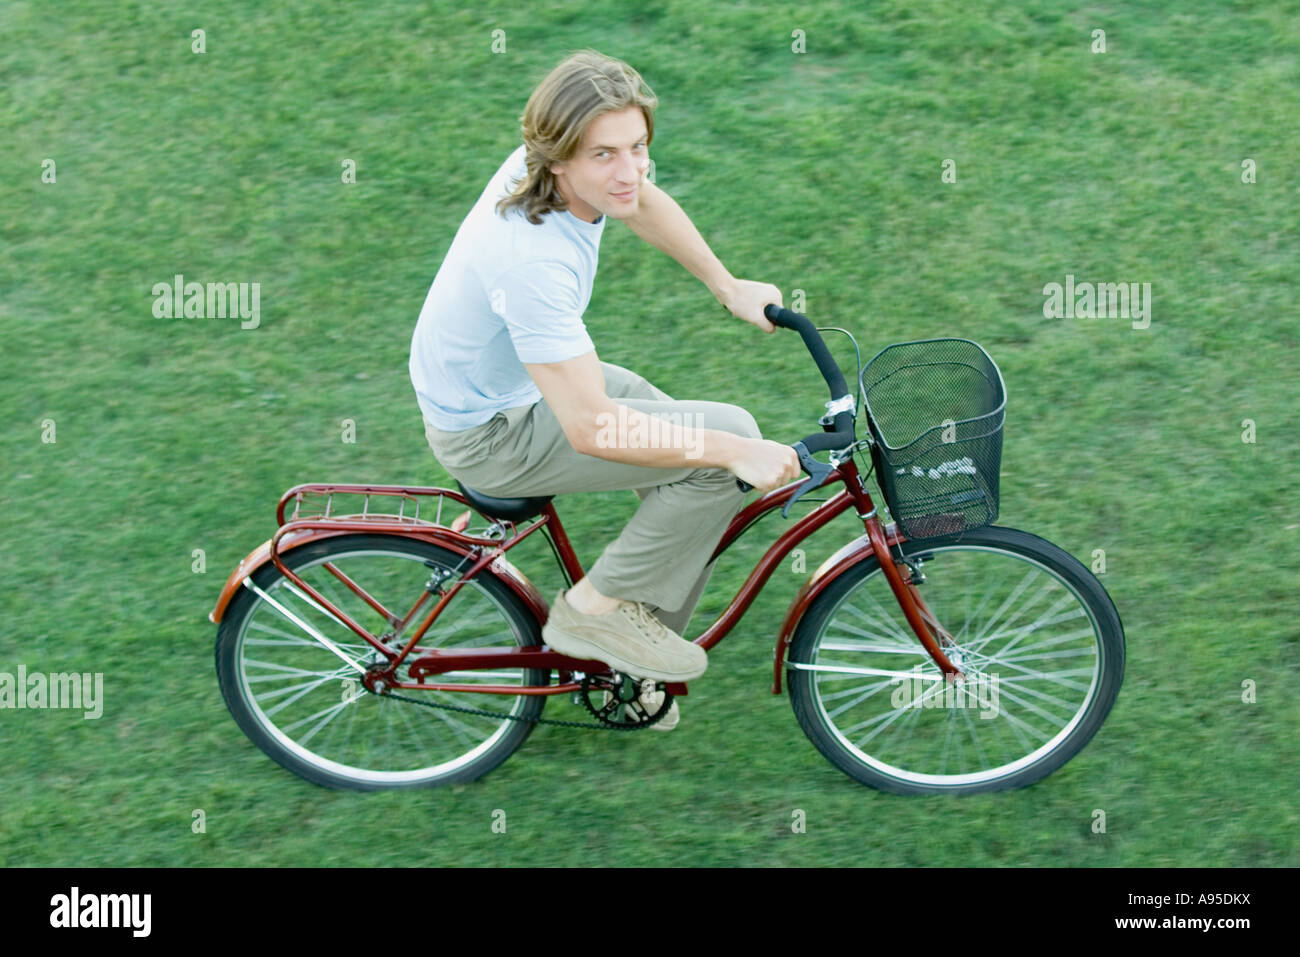 Young man riding bicycle on grass, high angle view Stock Photo